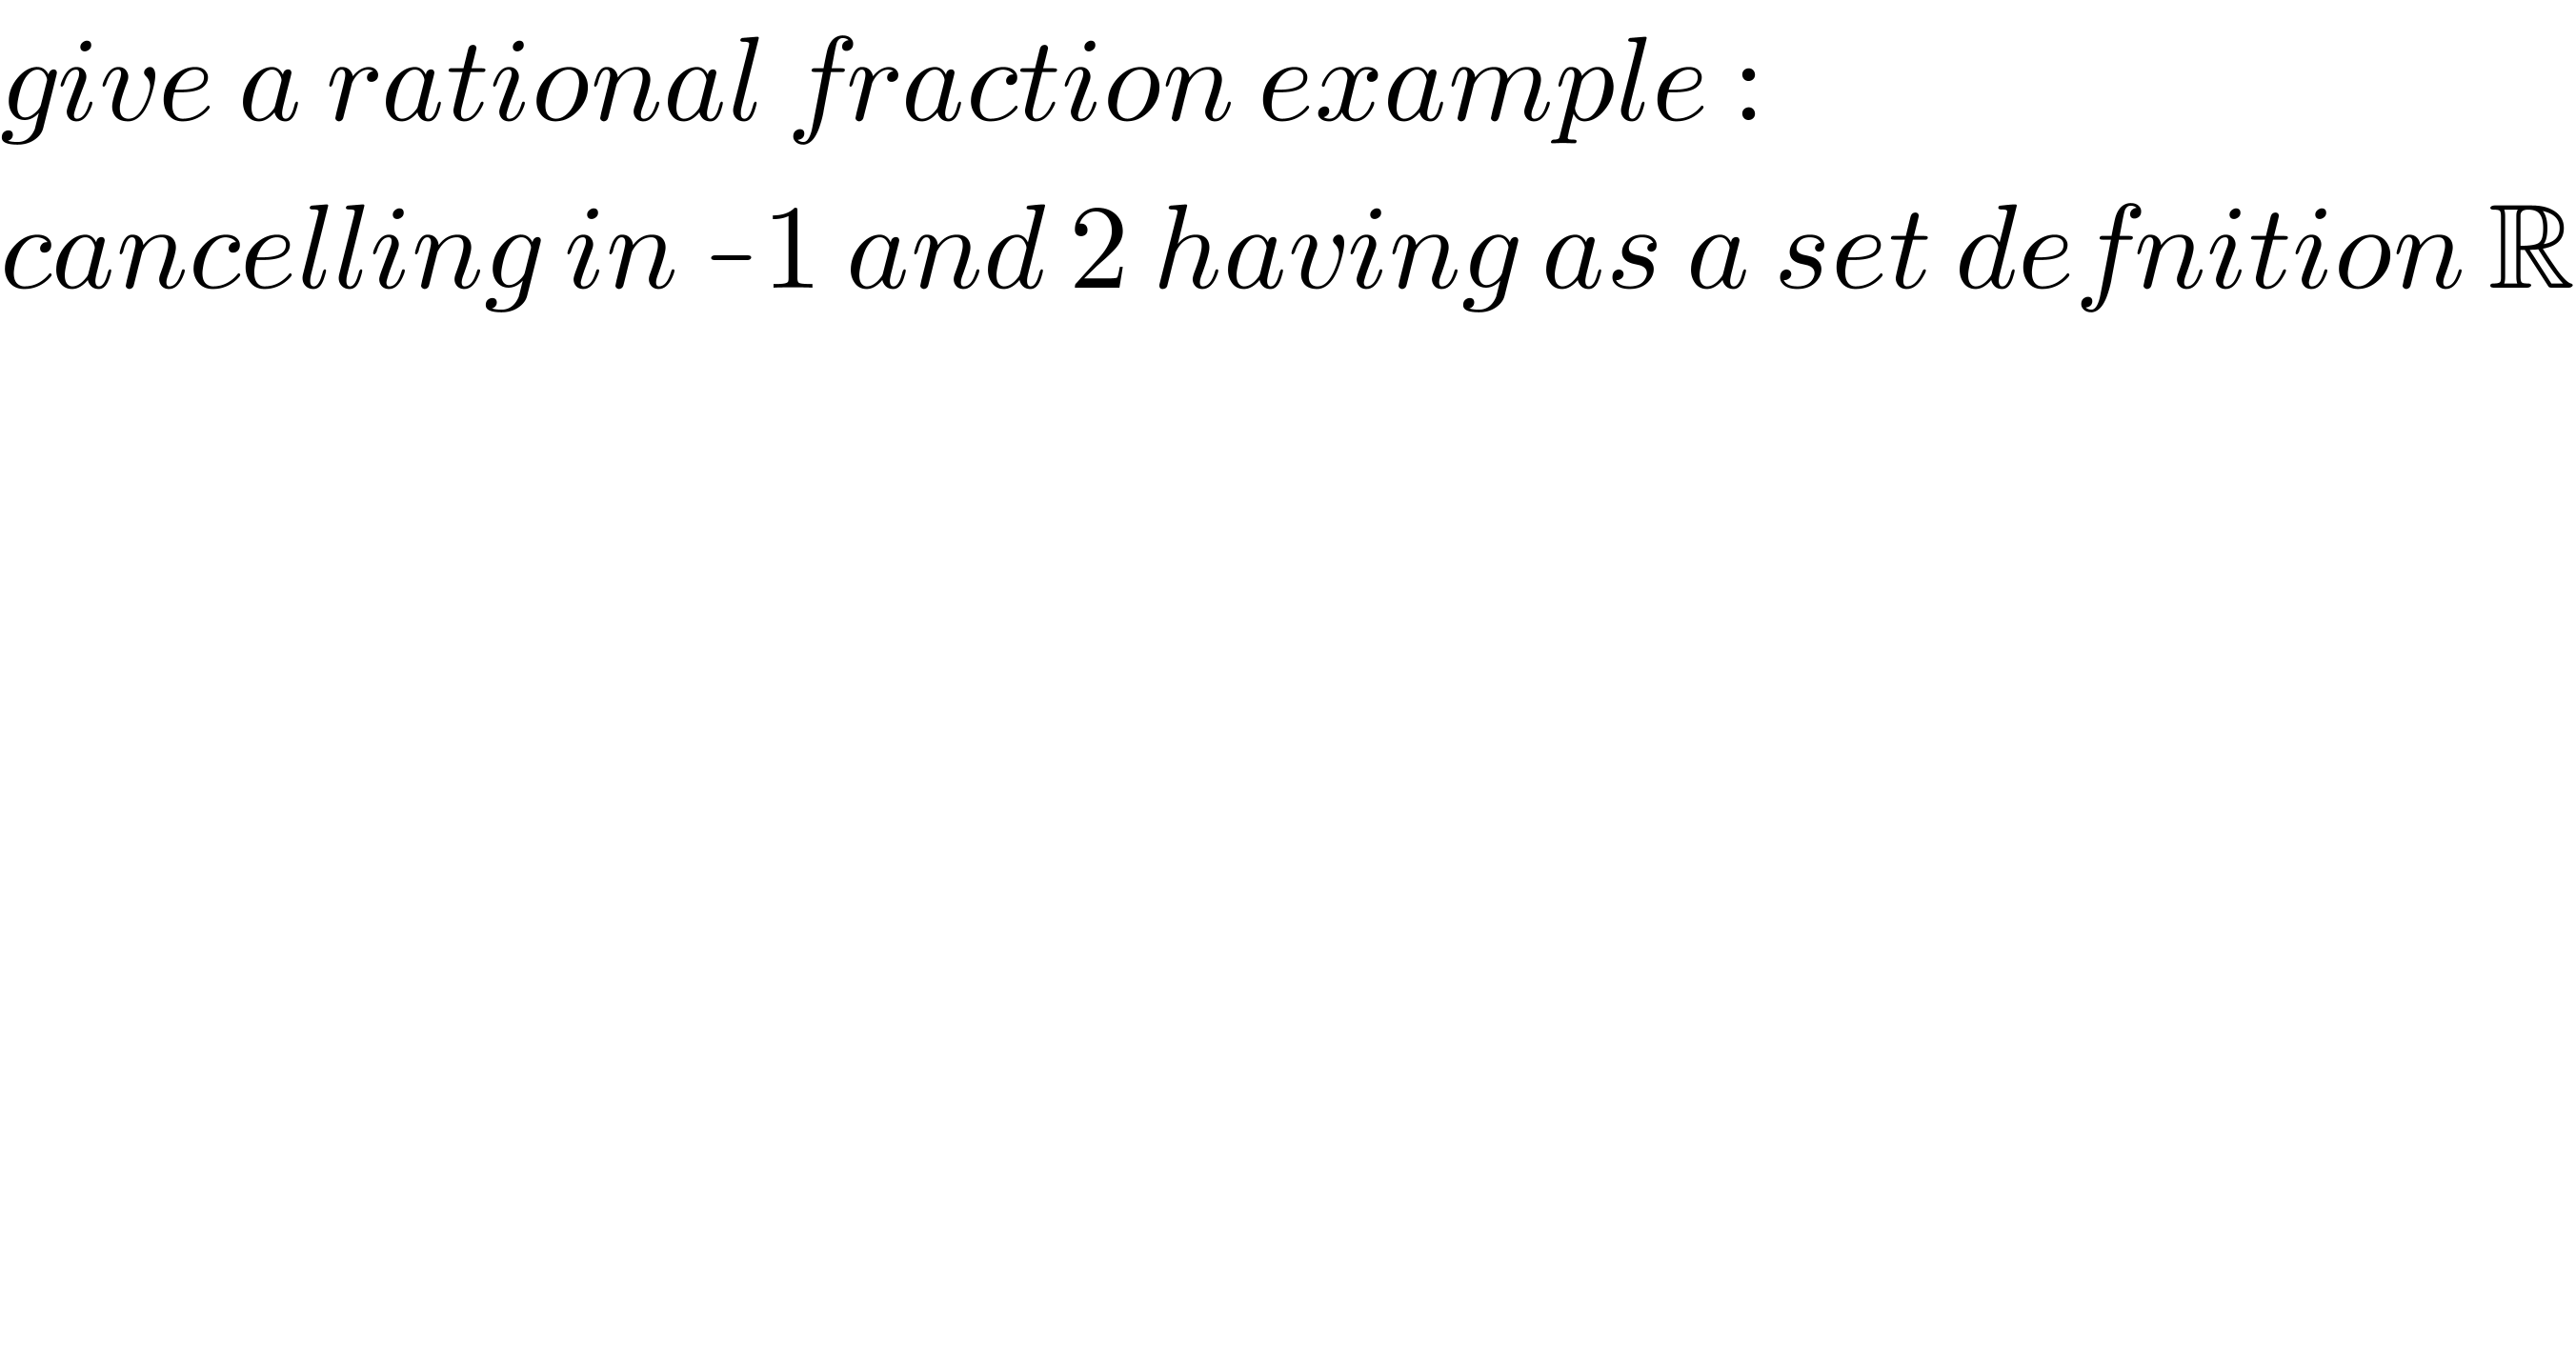 give a rational fraction example :  cancelling in -1 and 2 having as a set defnition R  